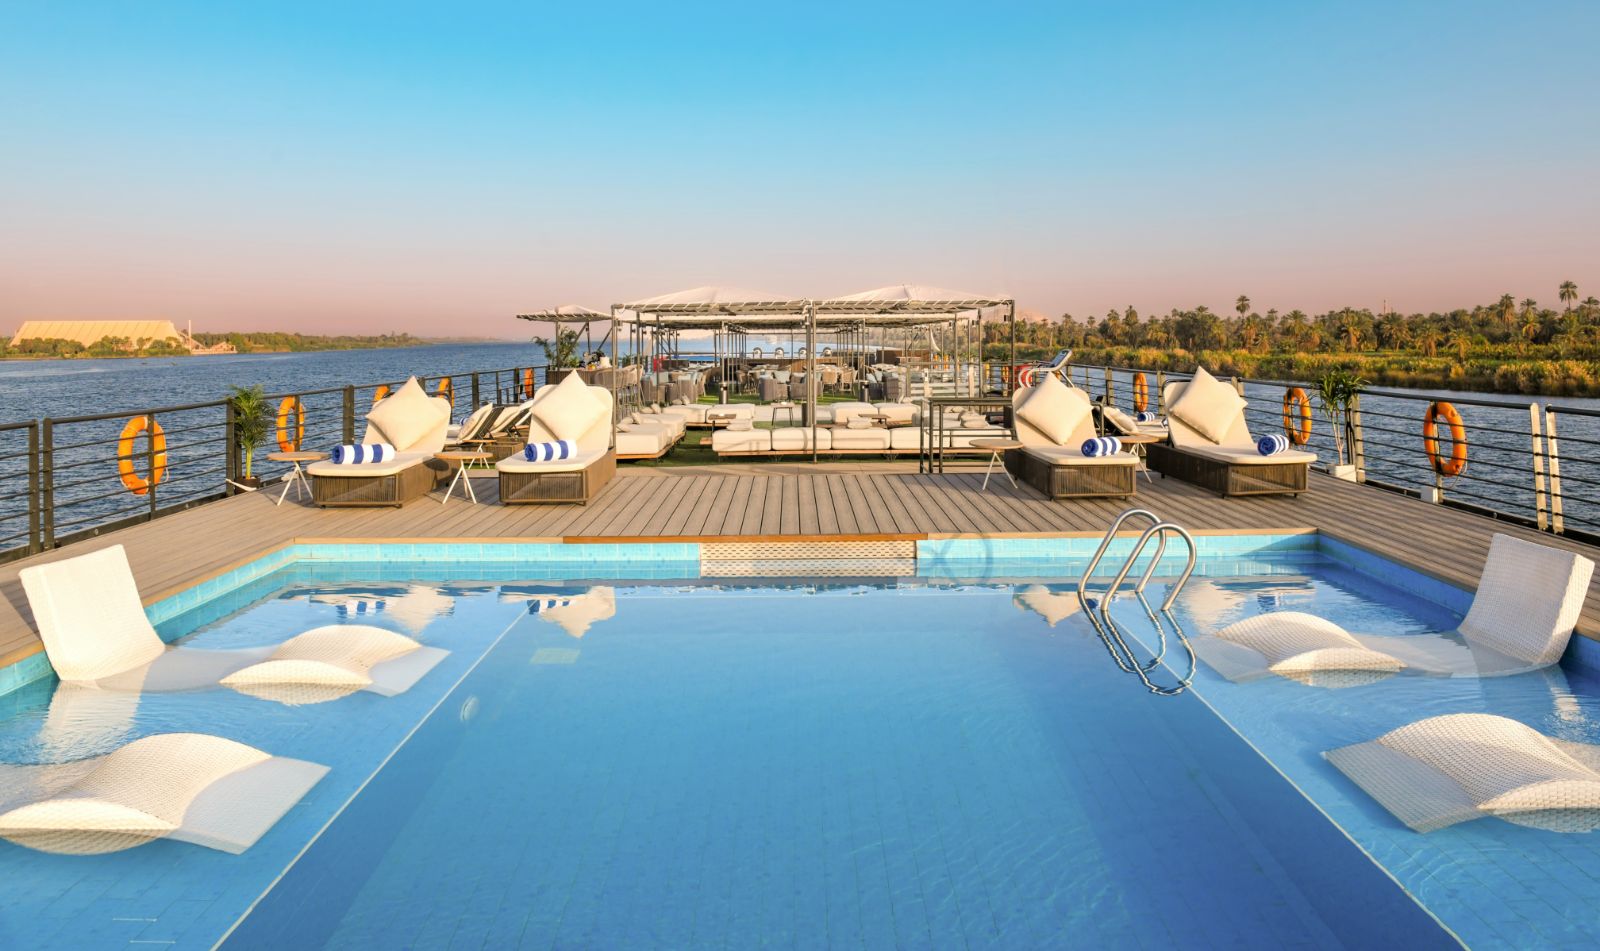 Swimming pool onboard the Historia boutique Nile cruise hotel in Egypt